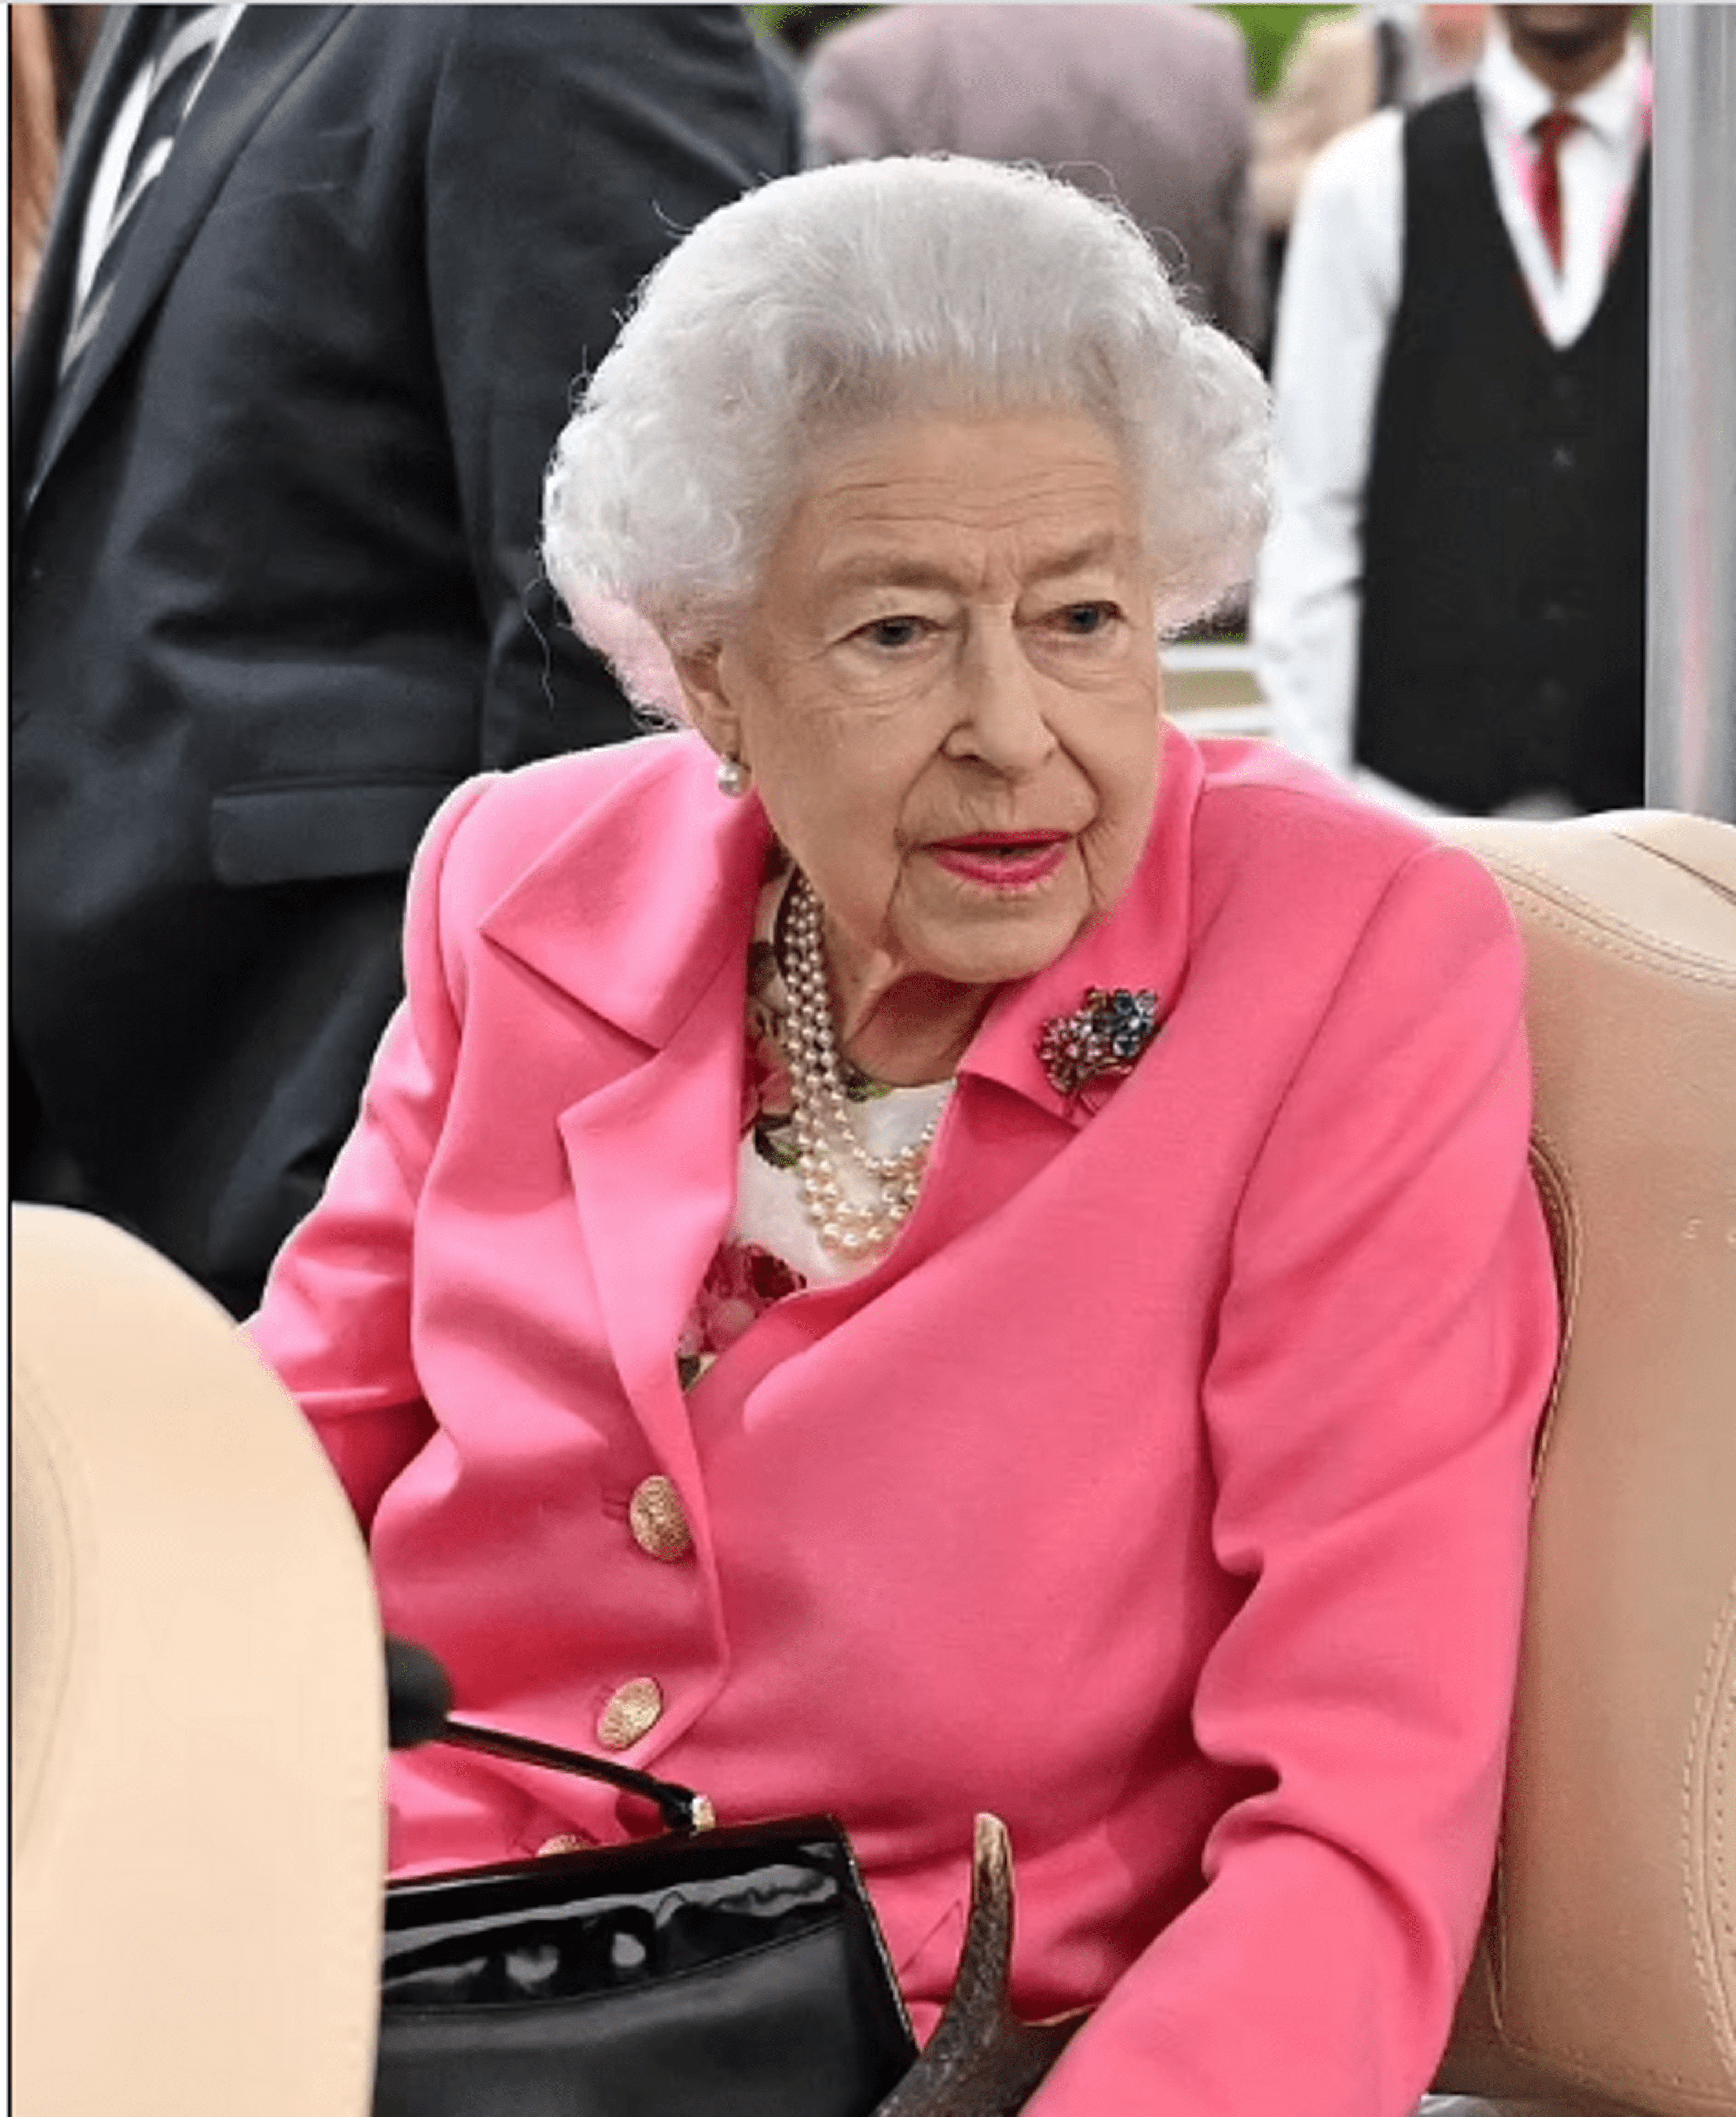 ”queen-elizabeth-ii-modeled-a-brooch-given-to-her-by-her-parents-for-her-19th-birthday”